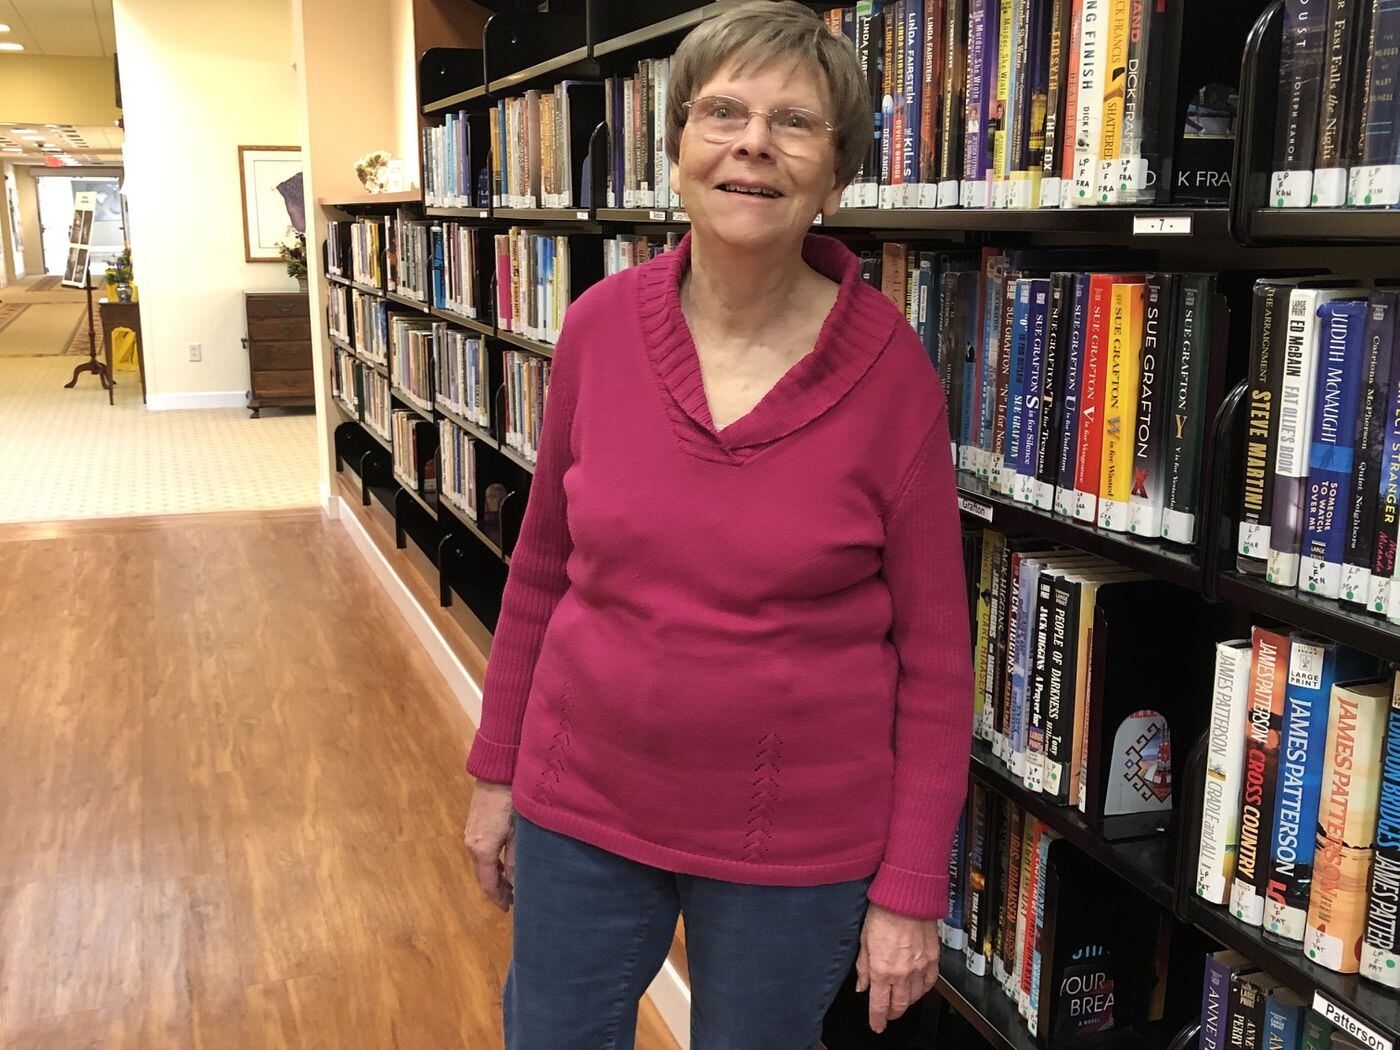 Betty Vosskaemper enjoyed the library during a tour of Pennswood Village, a retirement community in Bucks County.